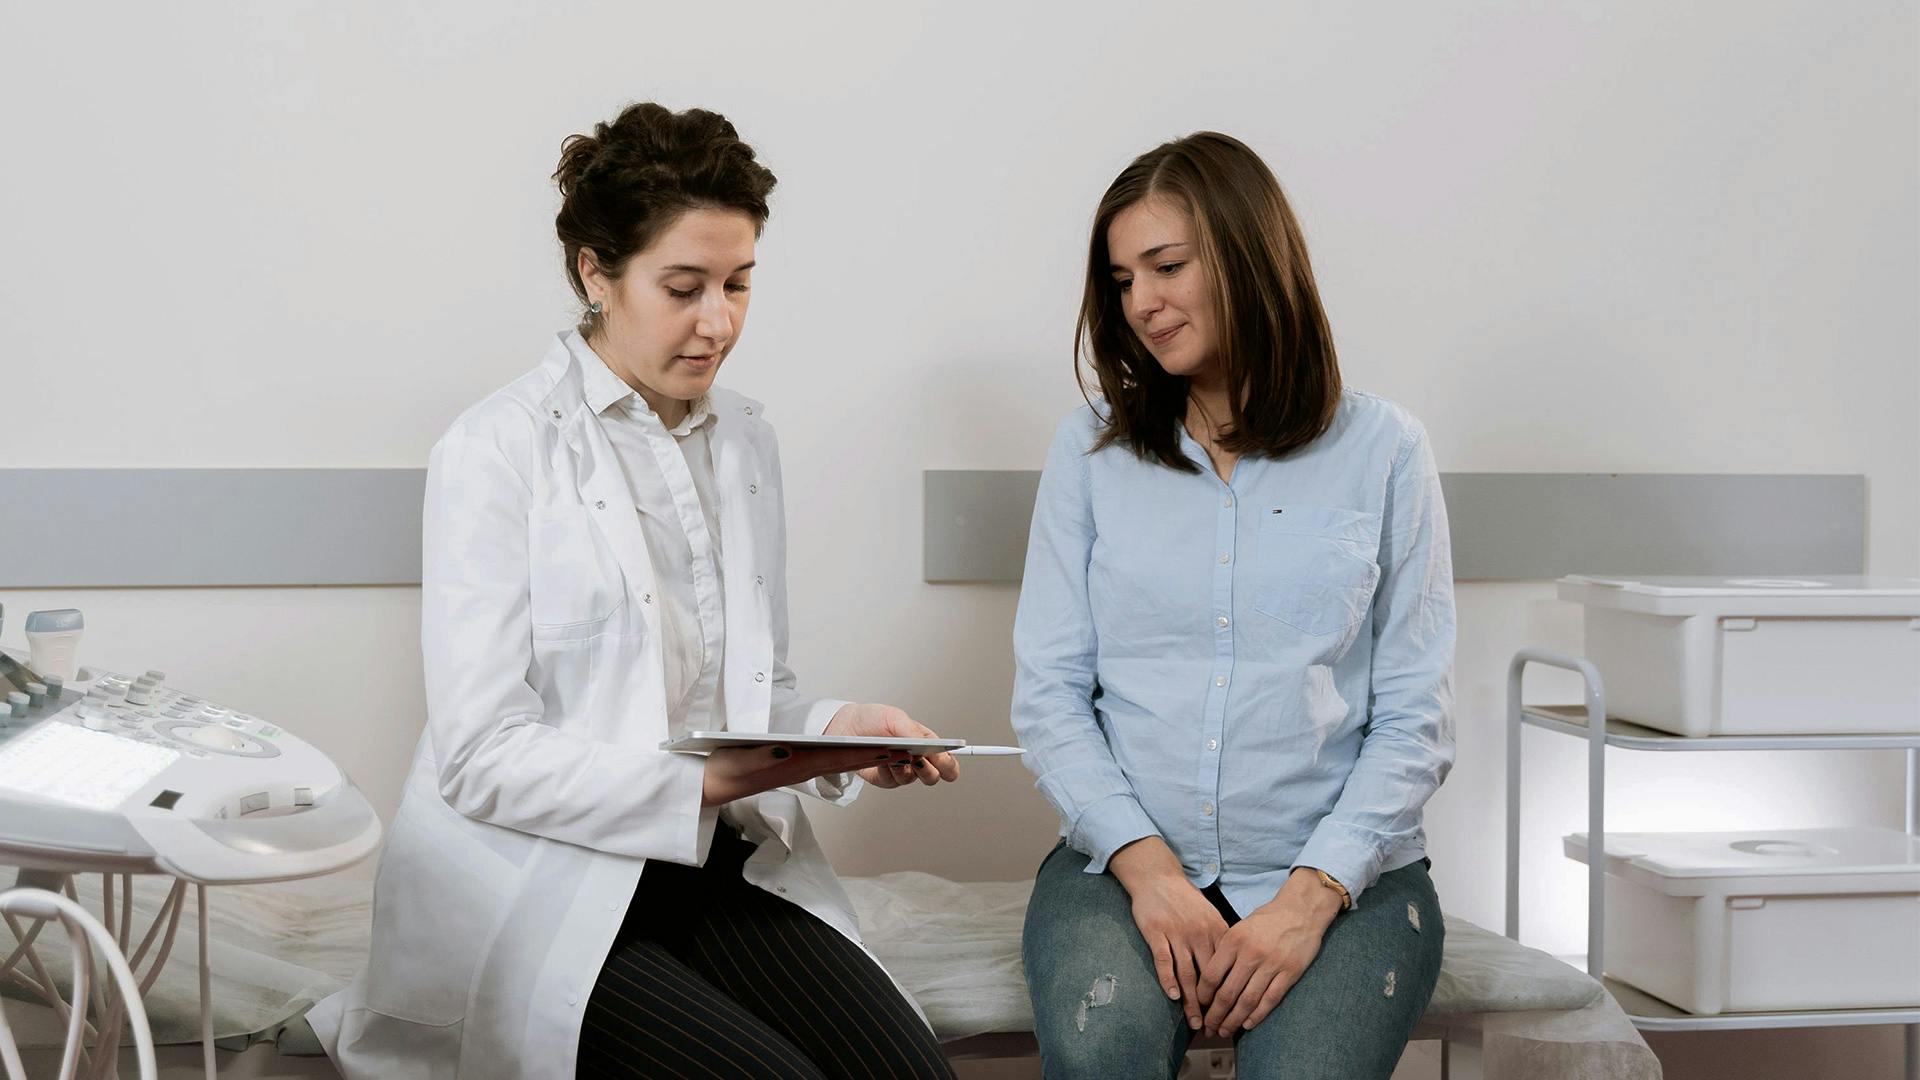 a medical professional having a consultation with a patient